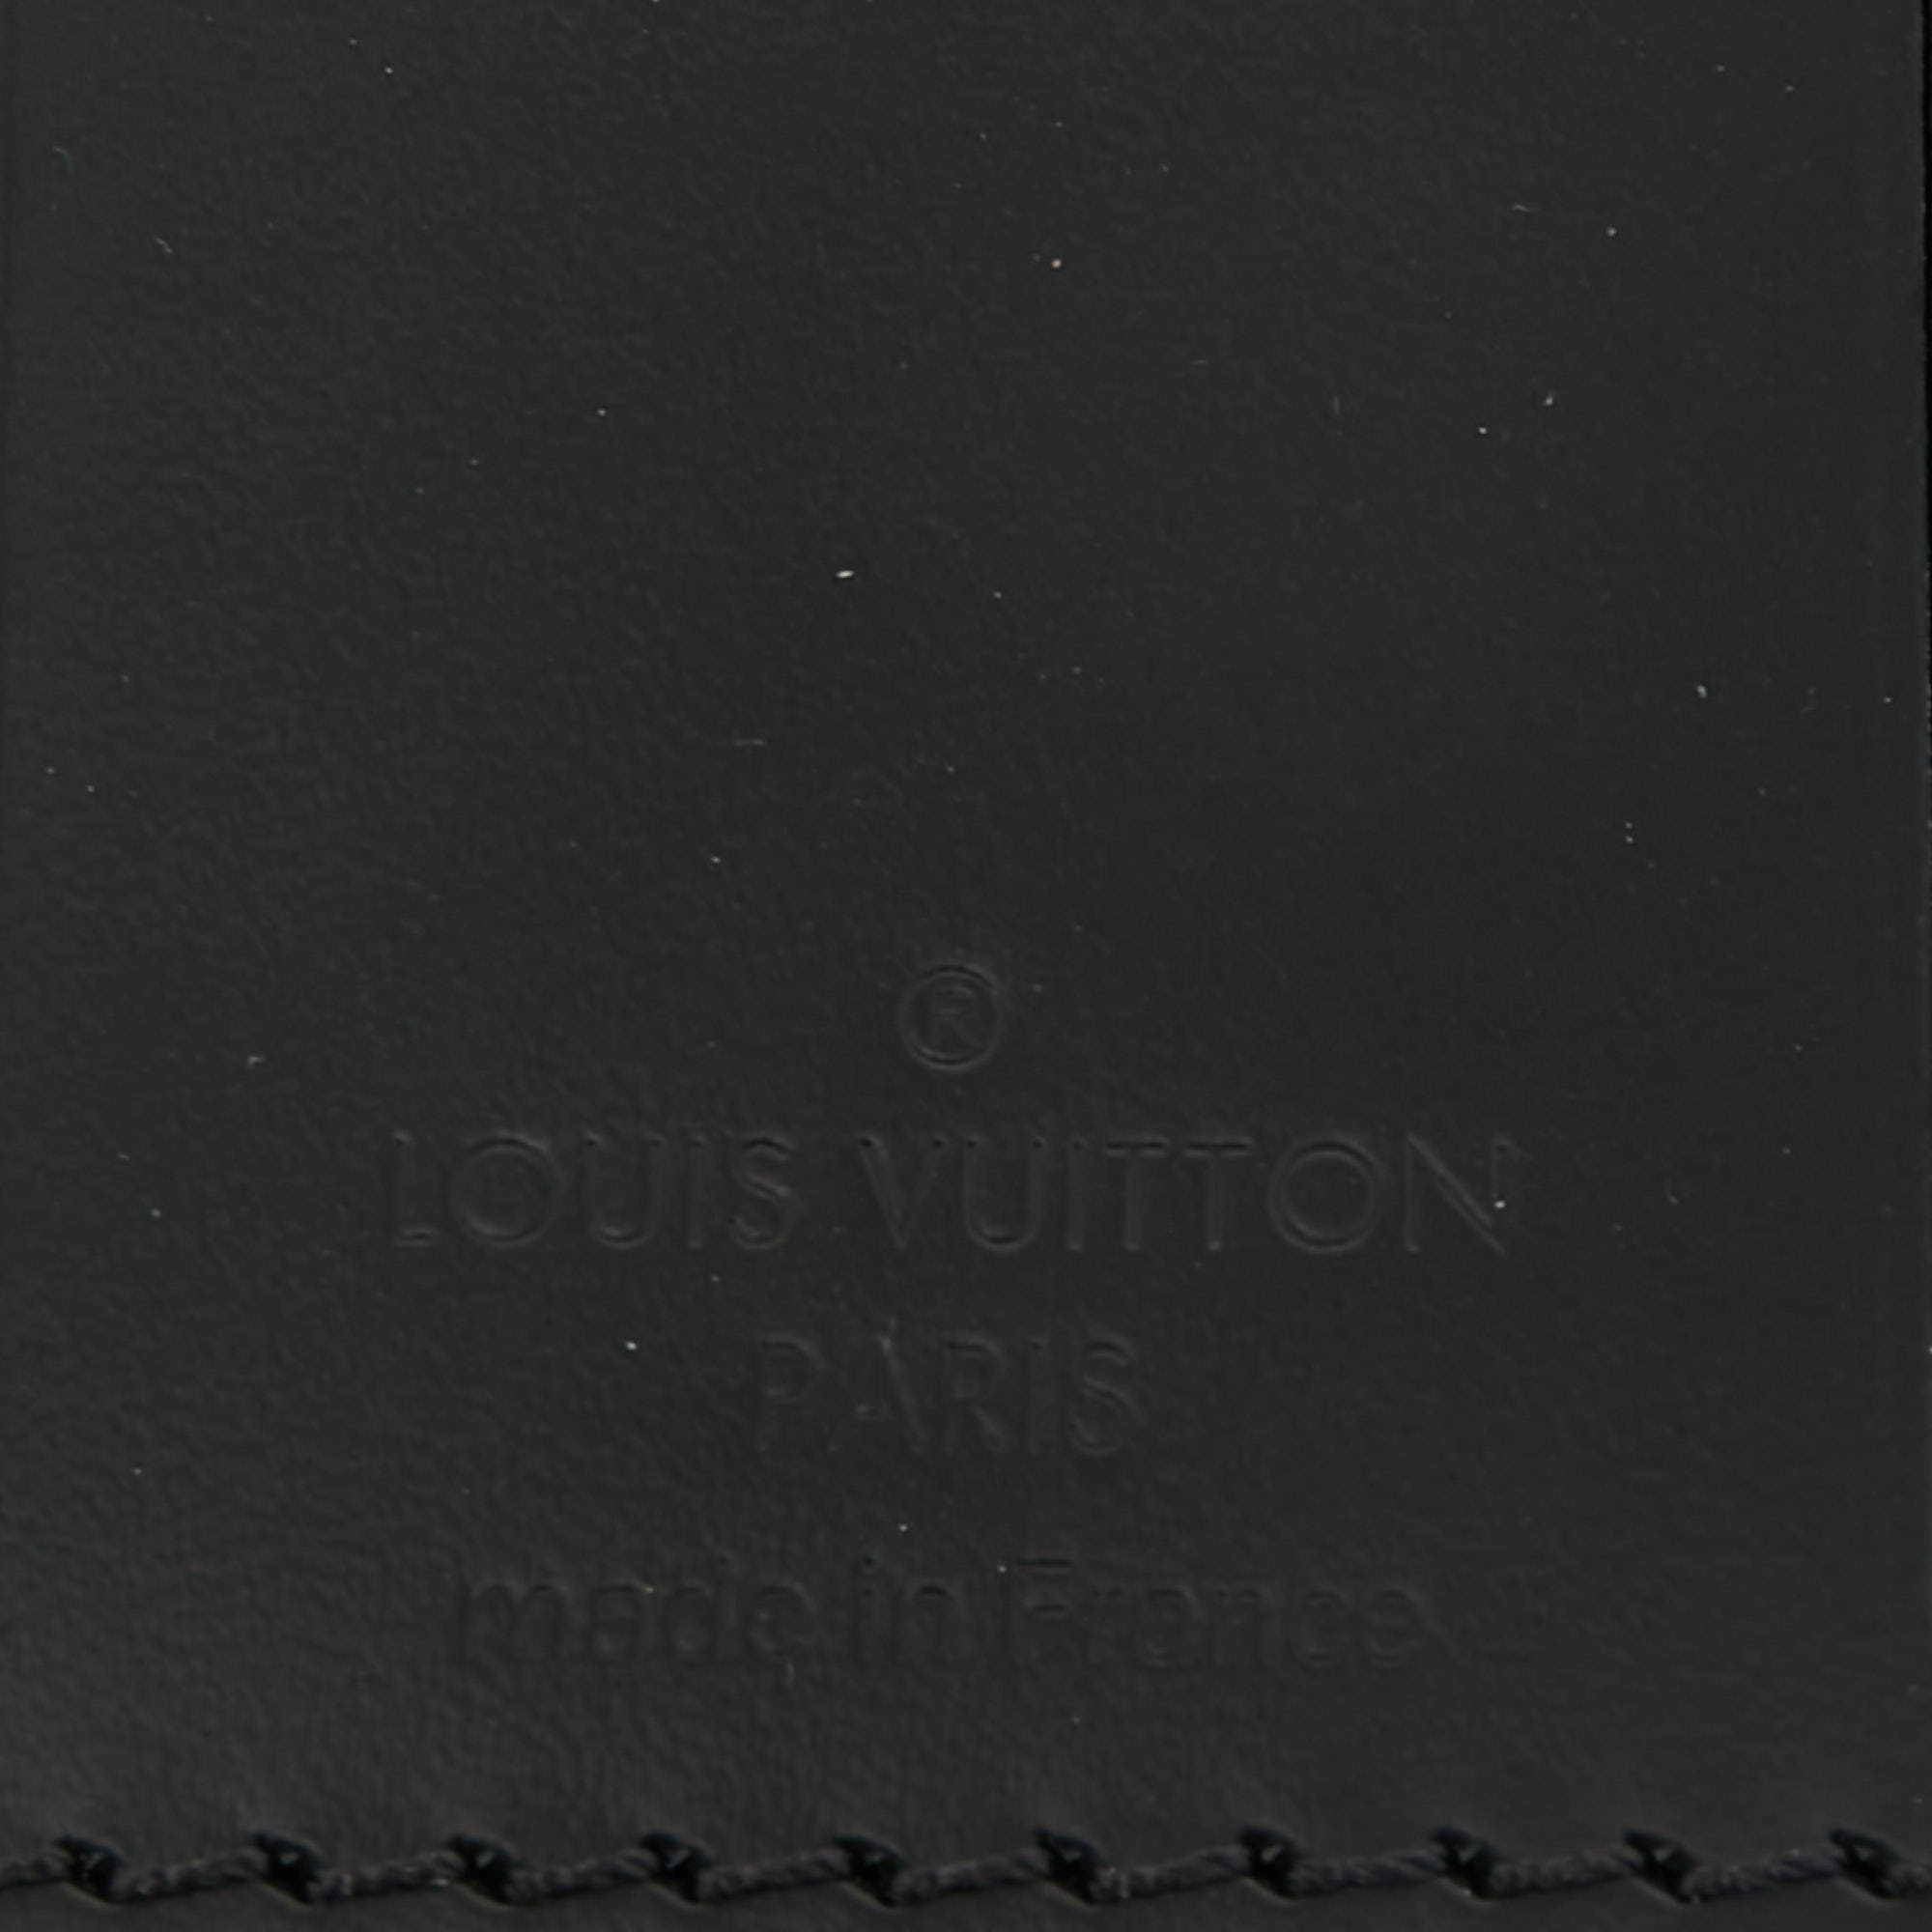 Louis Vuitton Luggage Name Tag w/initial K.K Black Used from Japan F/S